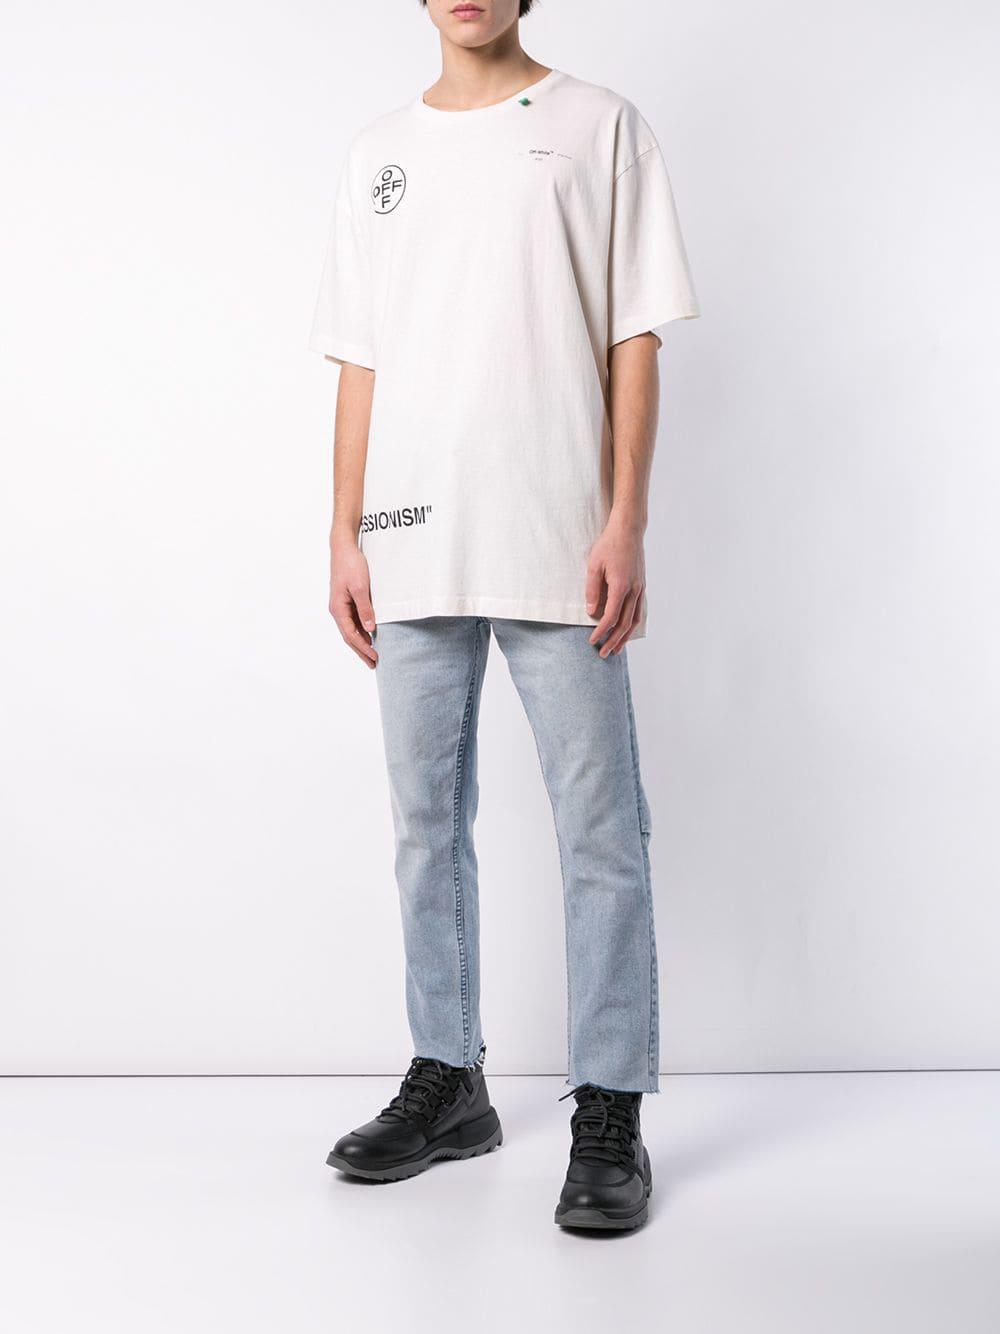 Off-White c/o Virgil Abloh Cotton Impressionism S/s T-shirt in White ...